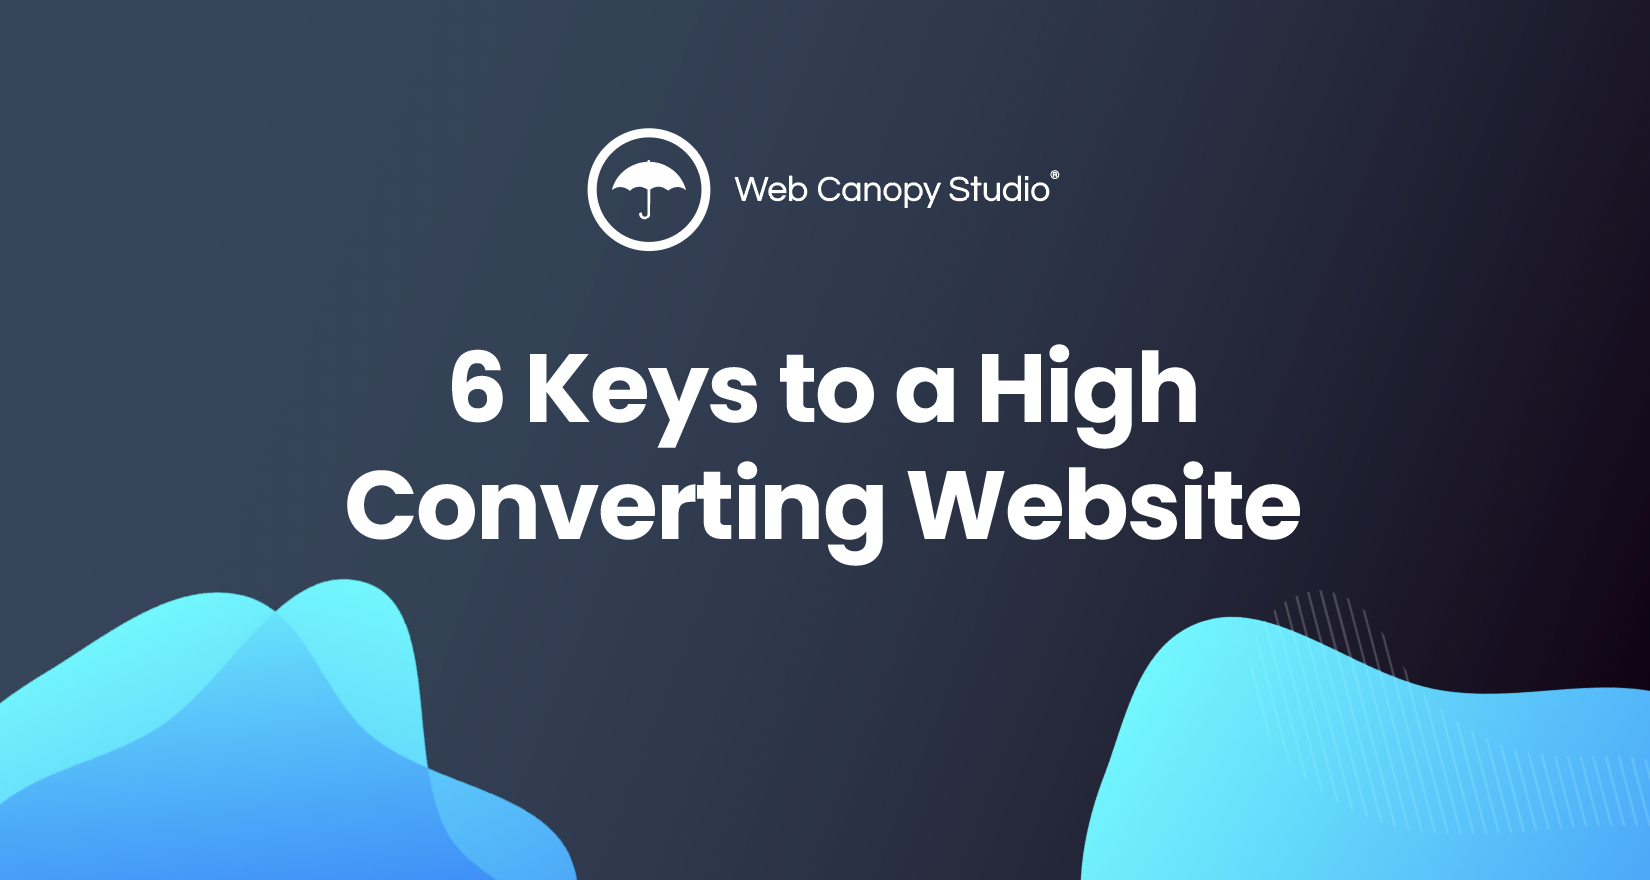 the 6 keys to a website that converts well and generates leads are right in front of you